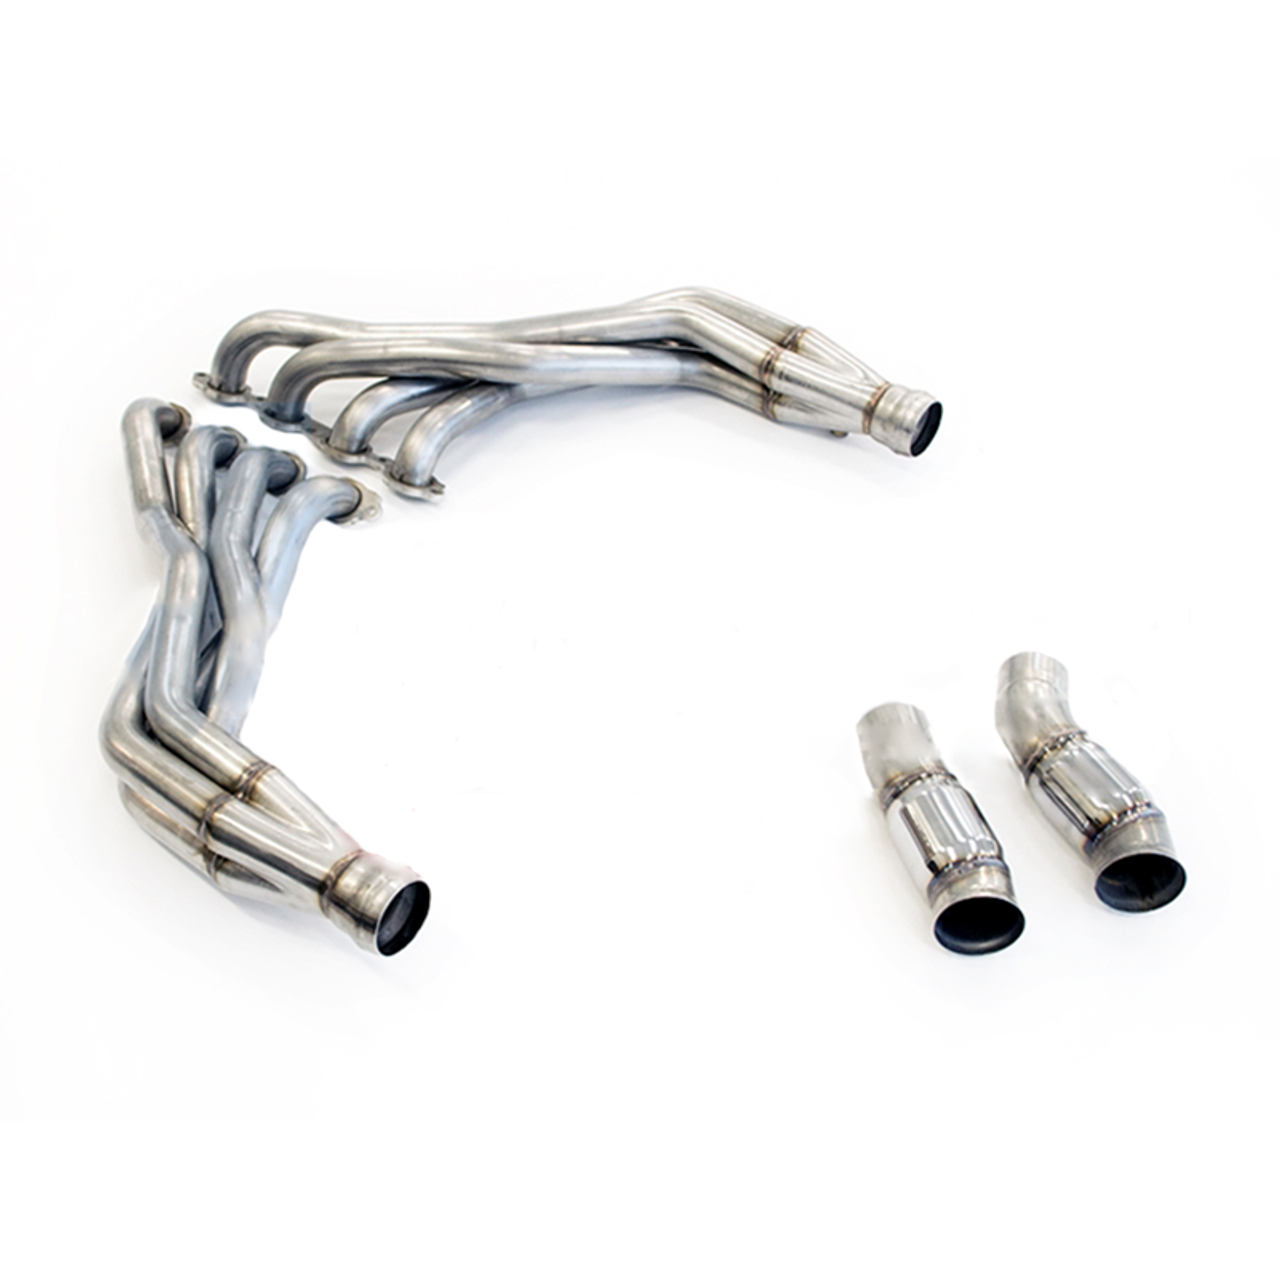 TSP 2.00" Longtube Headers & Catted Connection Pipes - 2016+ Camaro SS